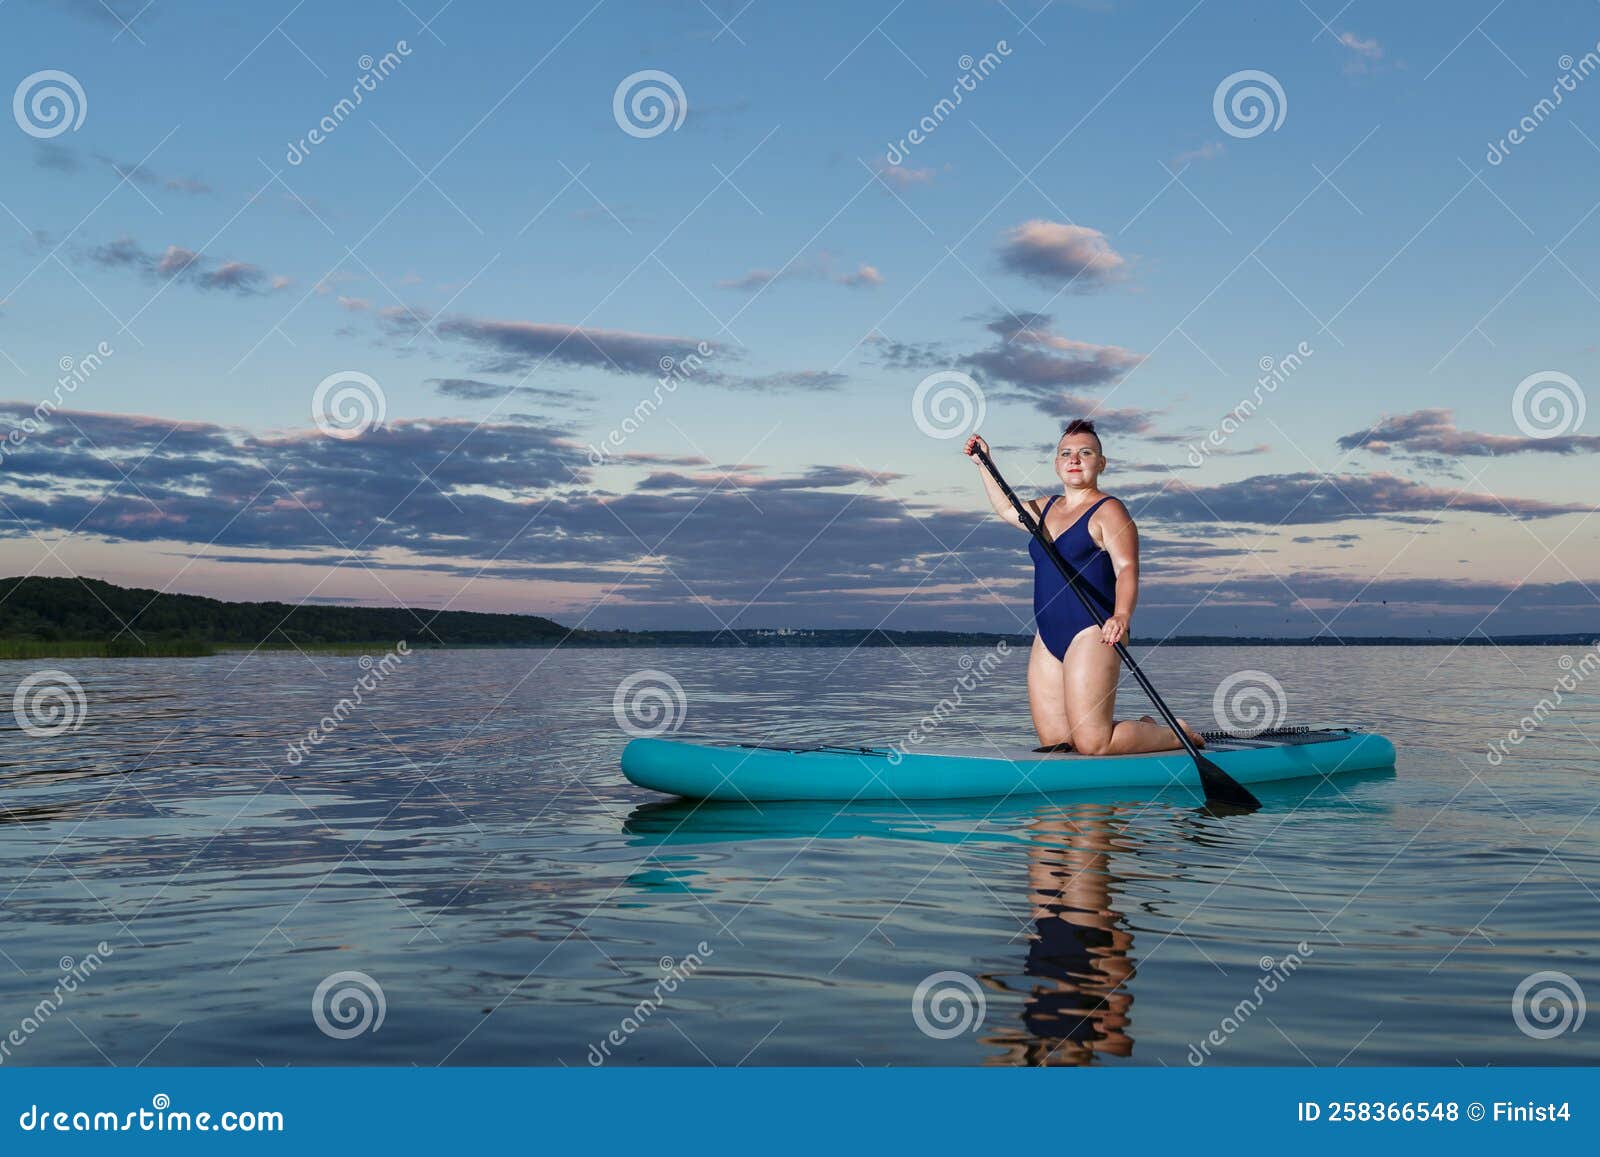 Woman in a Swimsuit Kneeling on a Snowboard in the Evening at Sunset ...